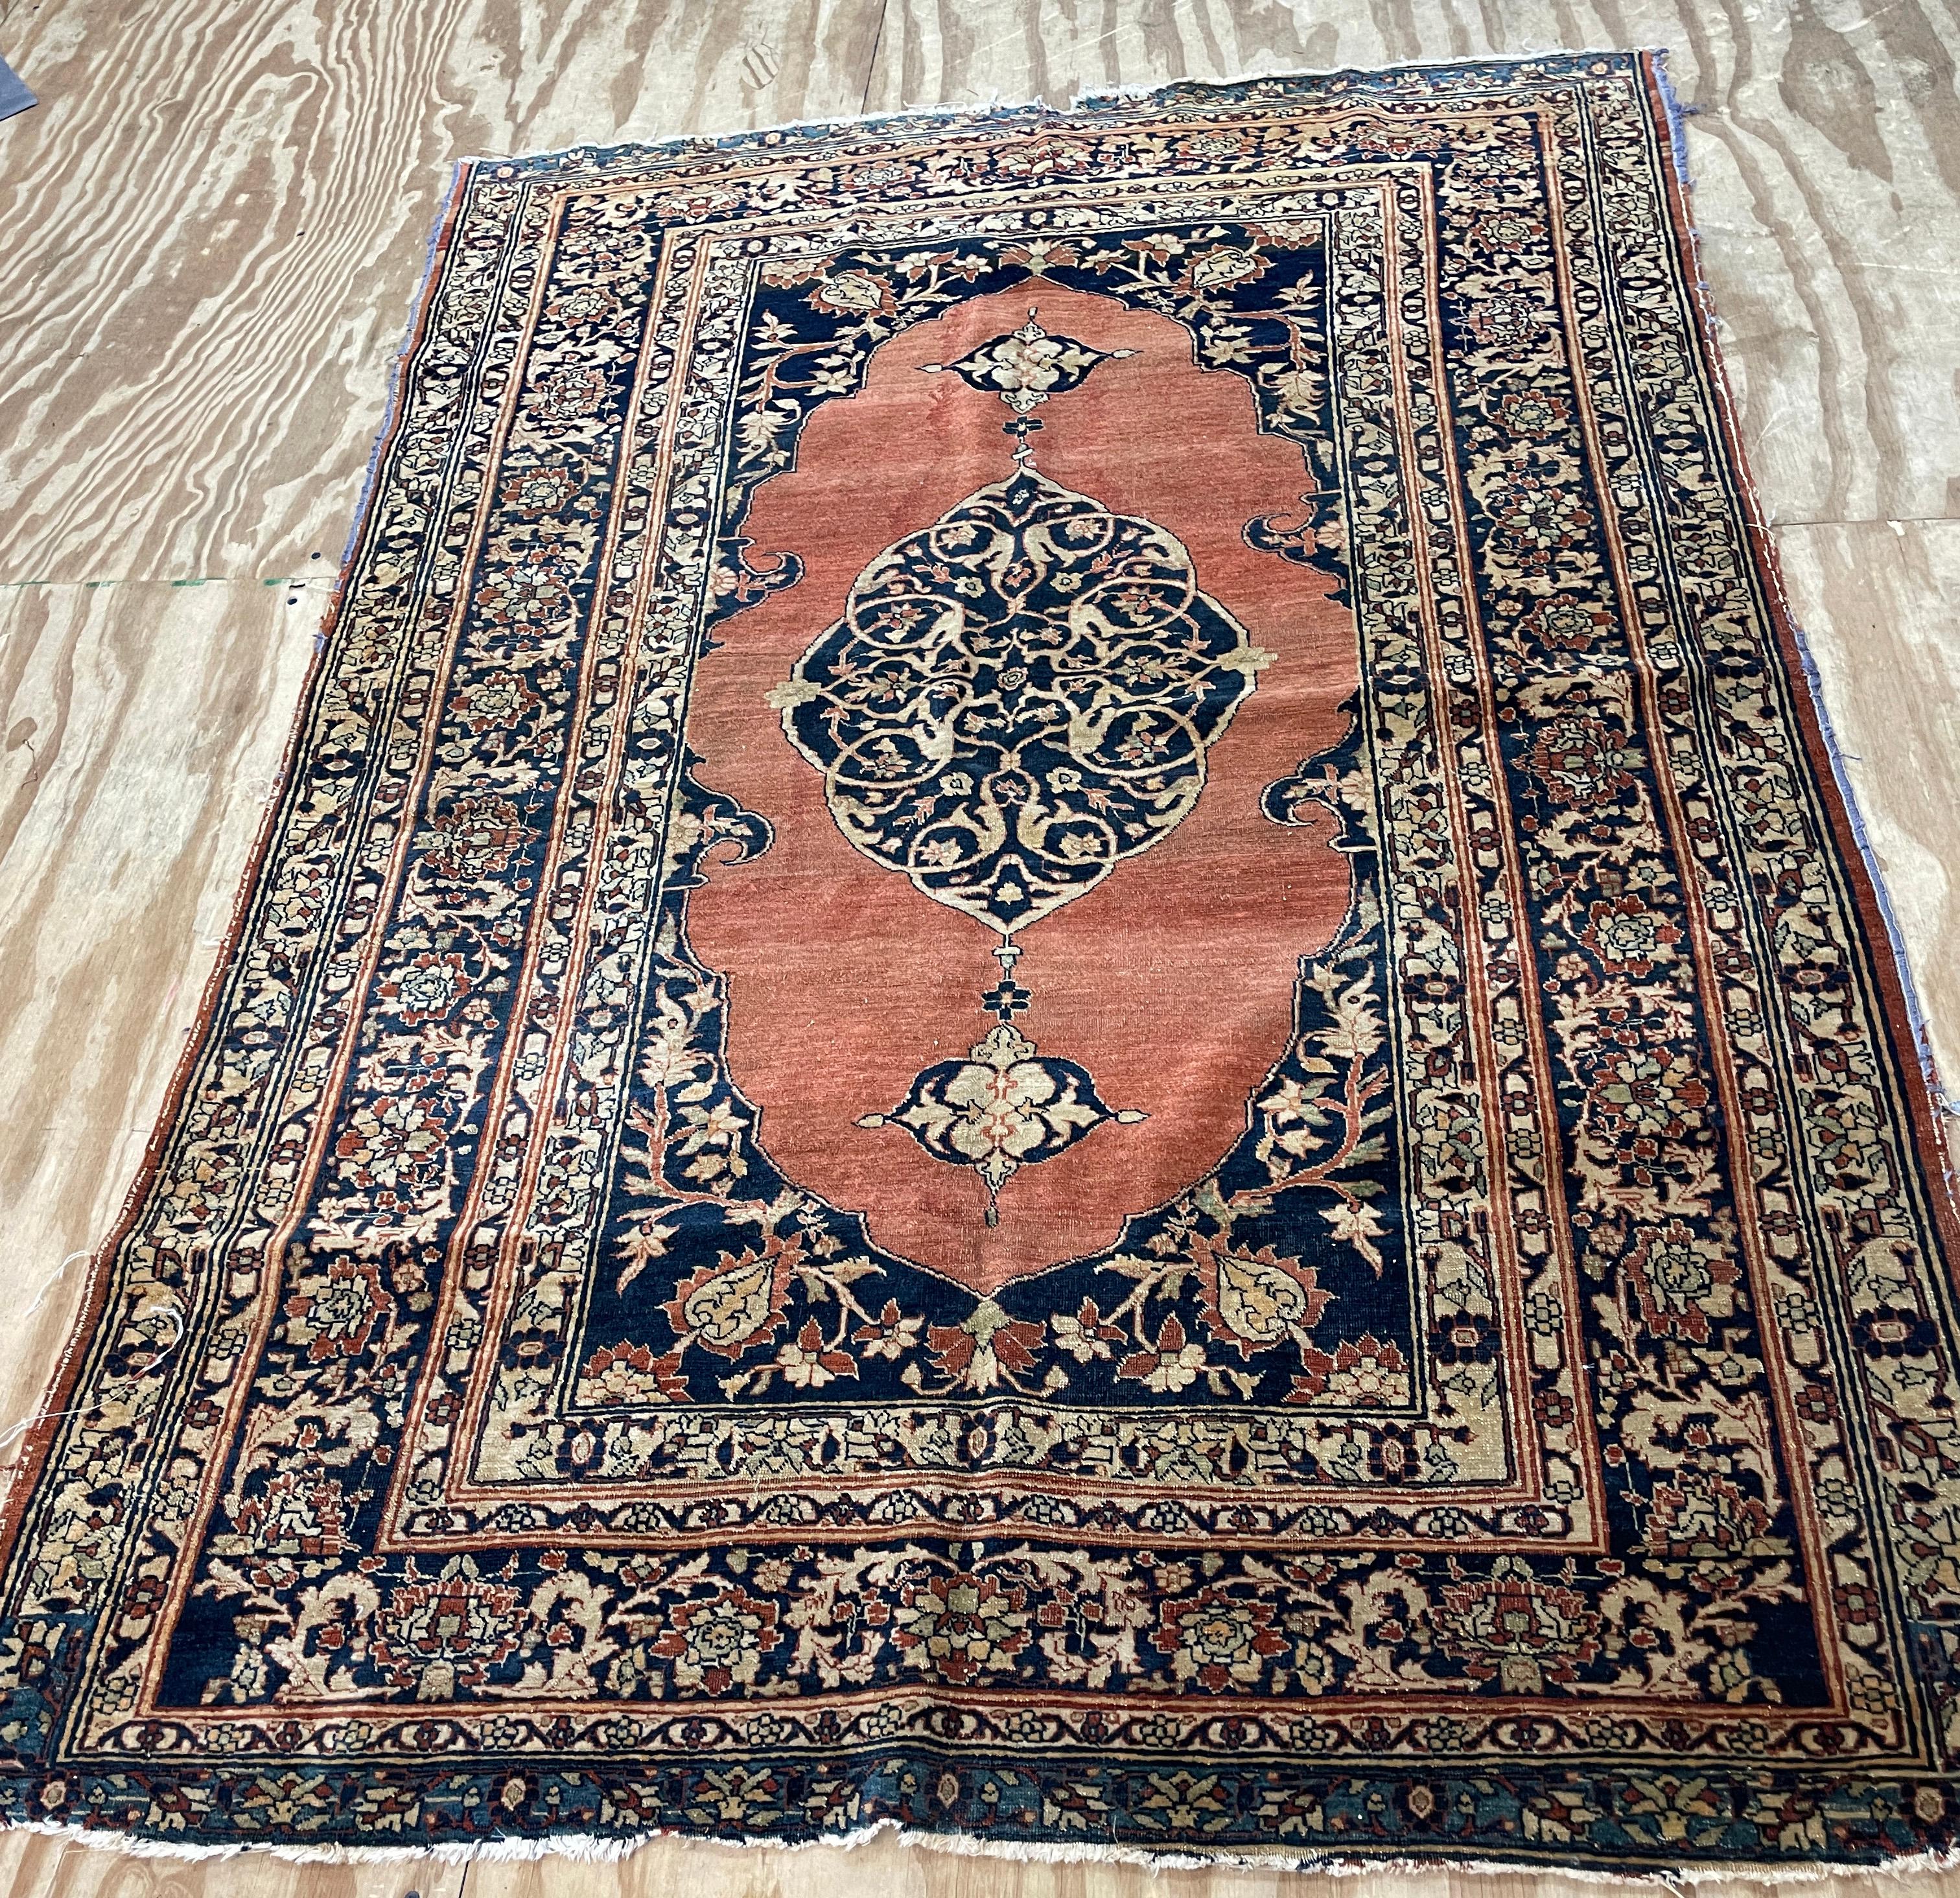 Introducing the exquisite Sarouk Feraghan, a timeless rug dating back to the late 1880s and remarkably preserved in excellent condition.

Woven in and around the picturesque region of Arak in northwest Iran, this rug boasts a captivating allover